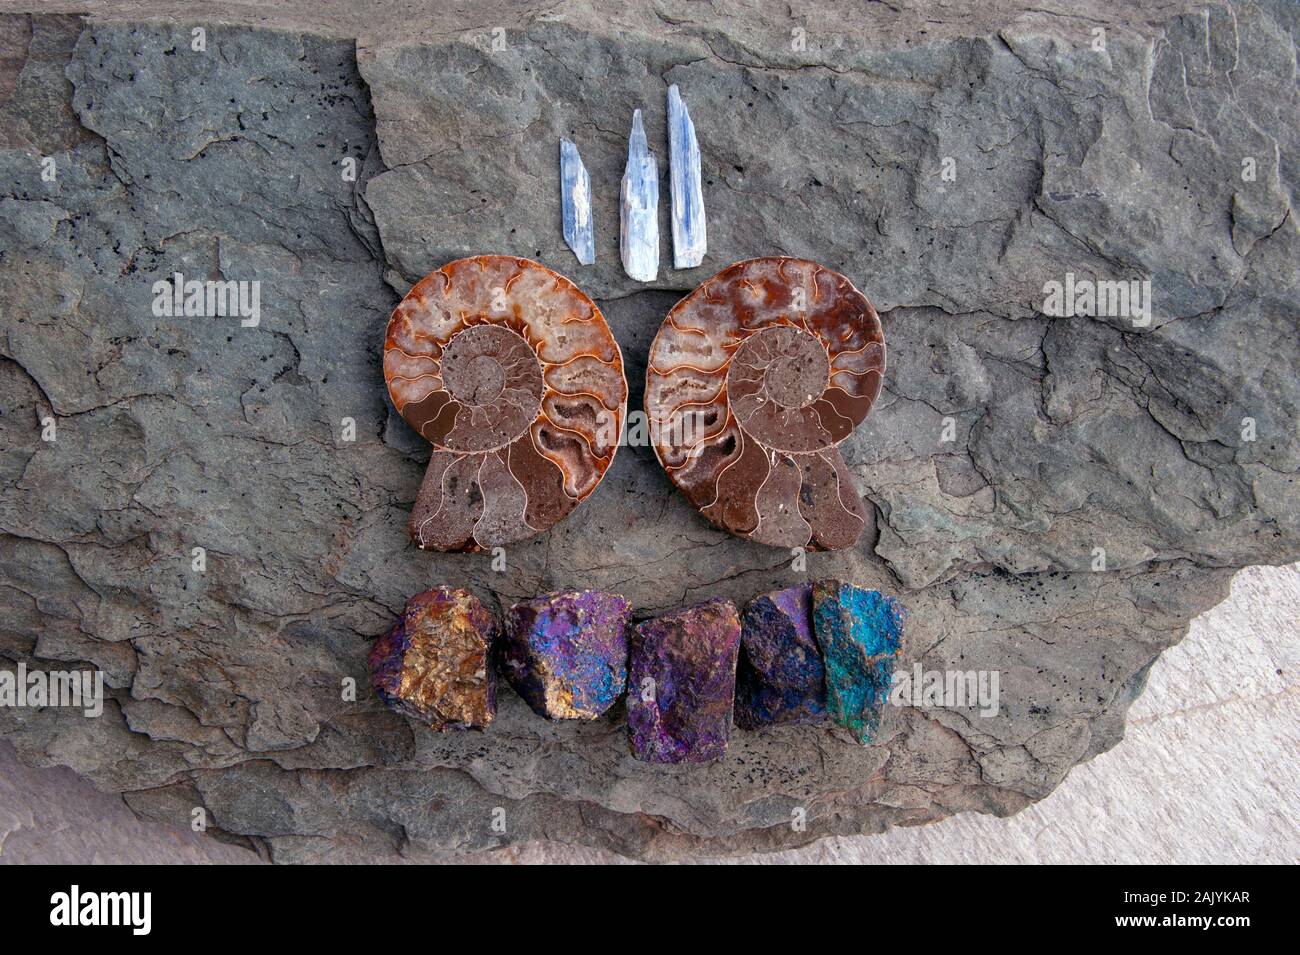 Fossil ammonite spiral seashells with Kyanite and Peacock rock. Stock Photo